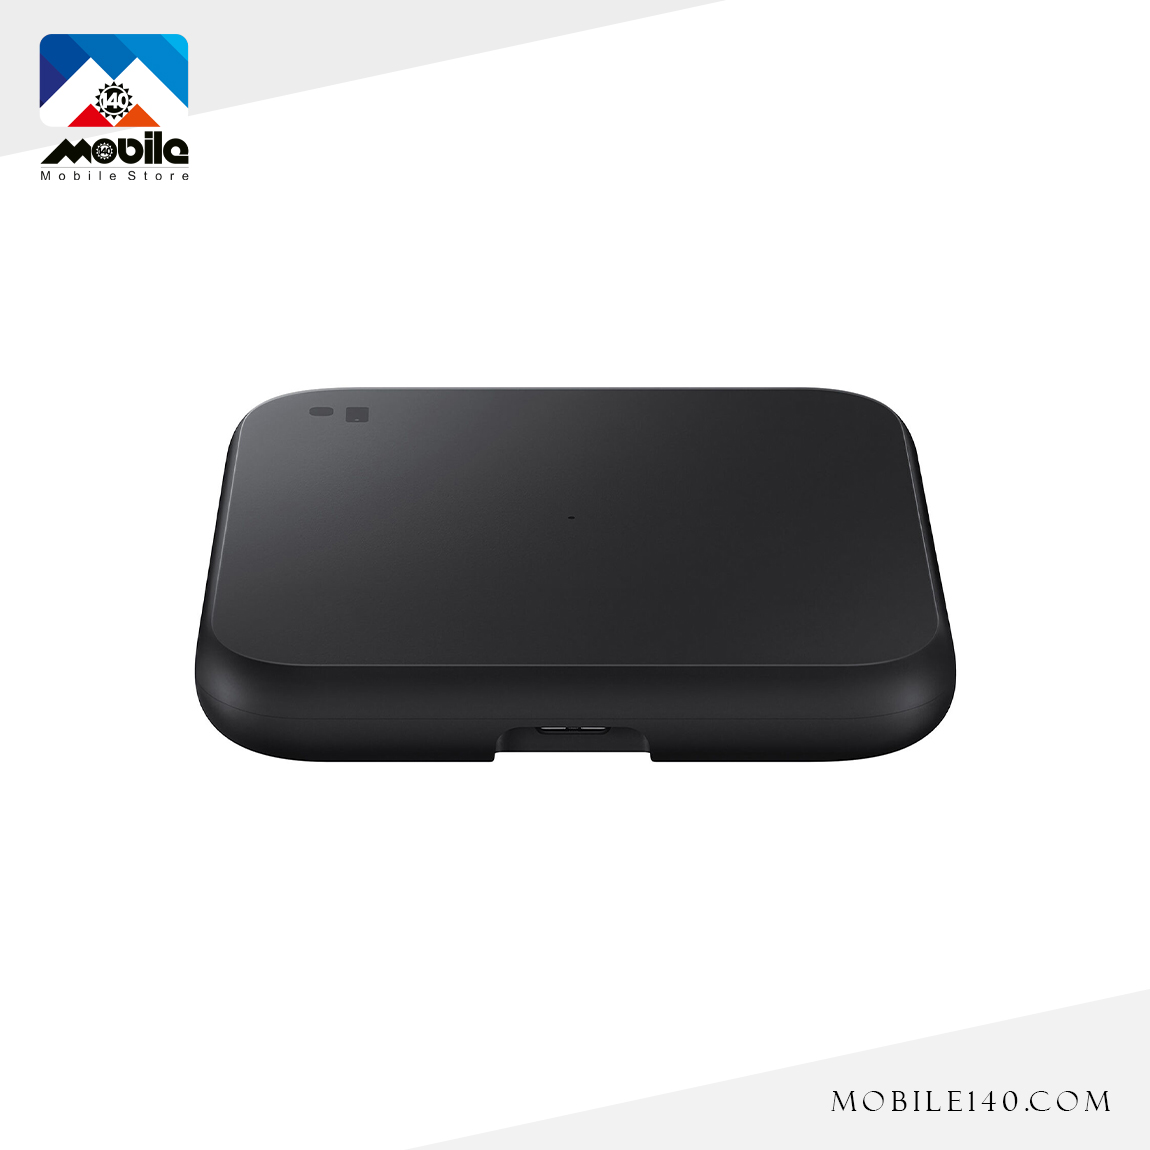 Samsung Wireless Charger Pad1300 1